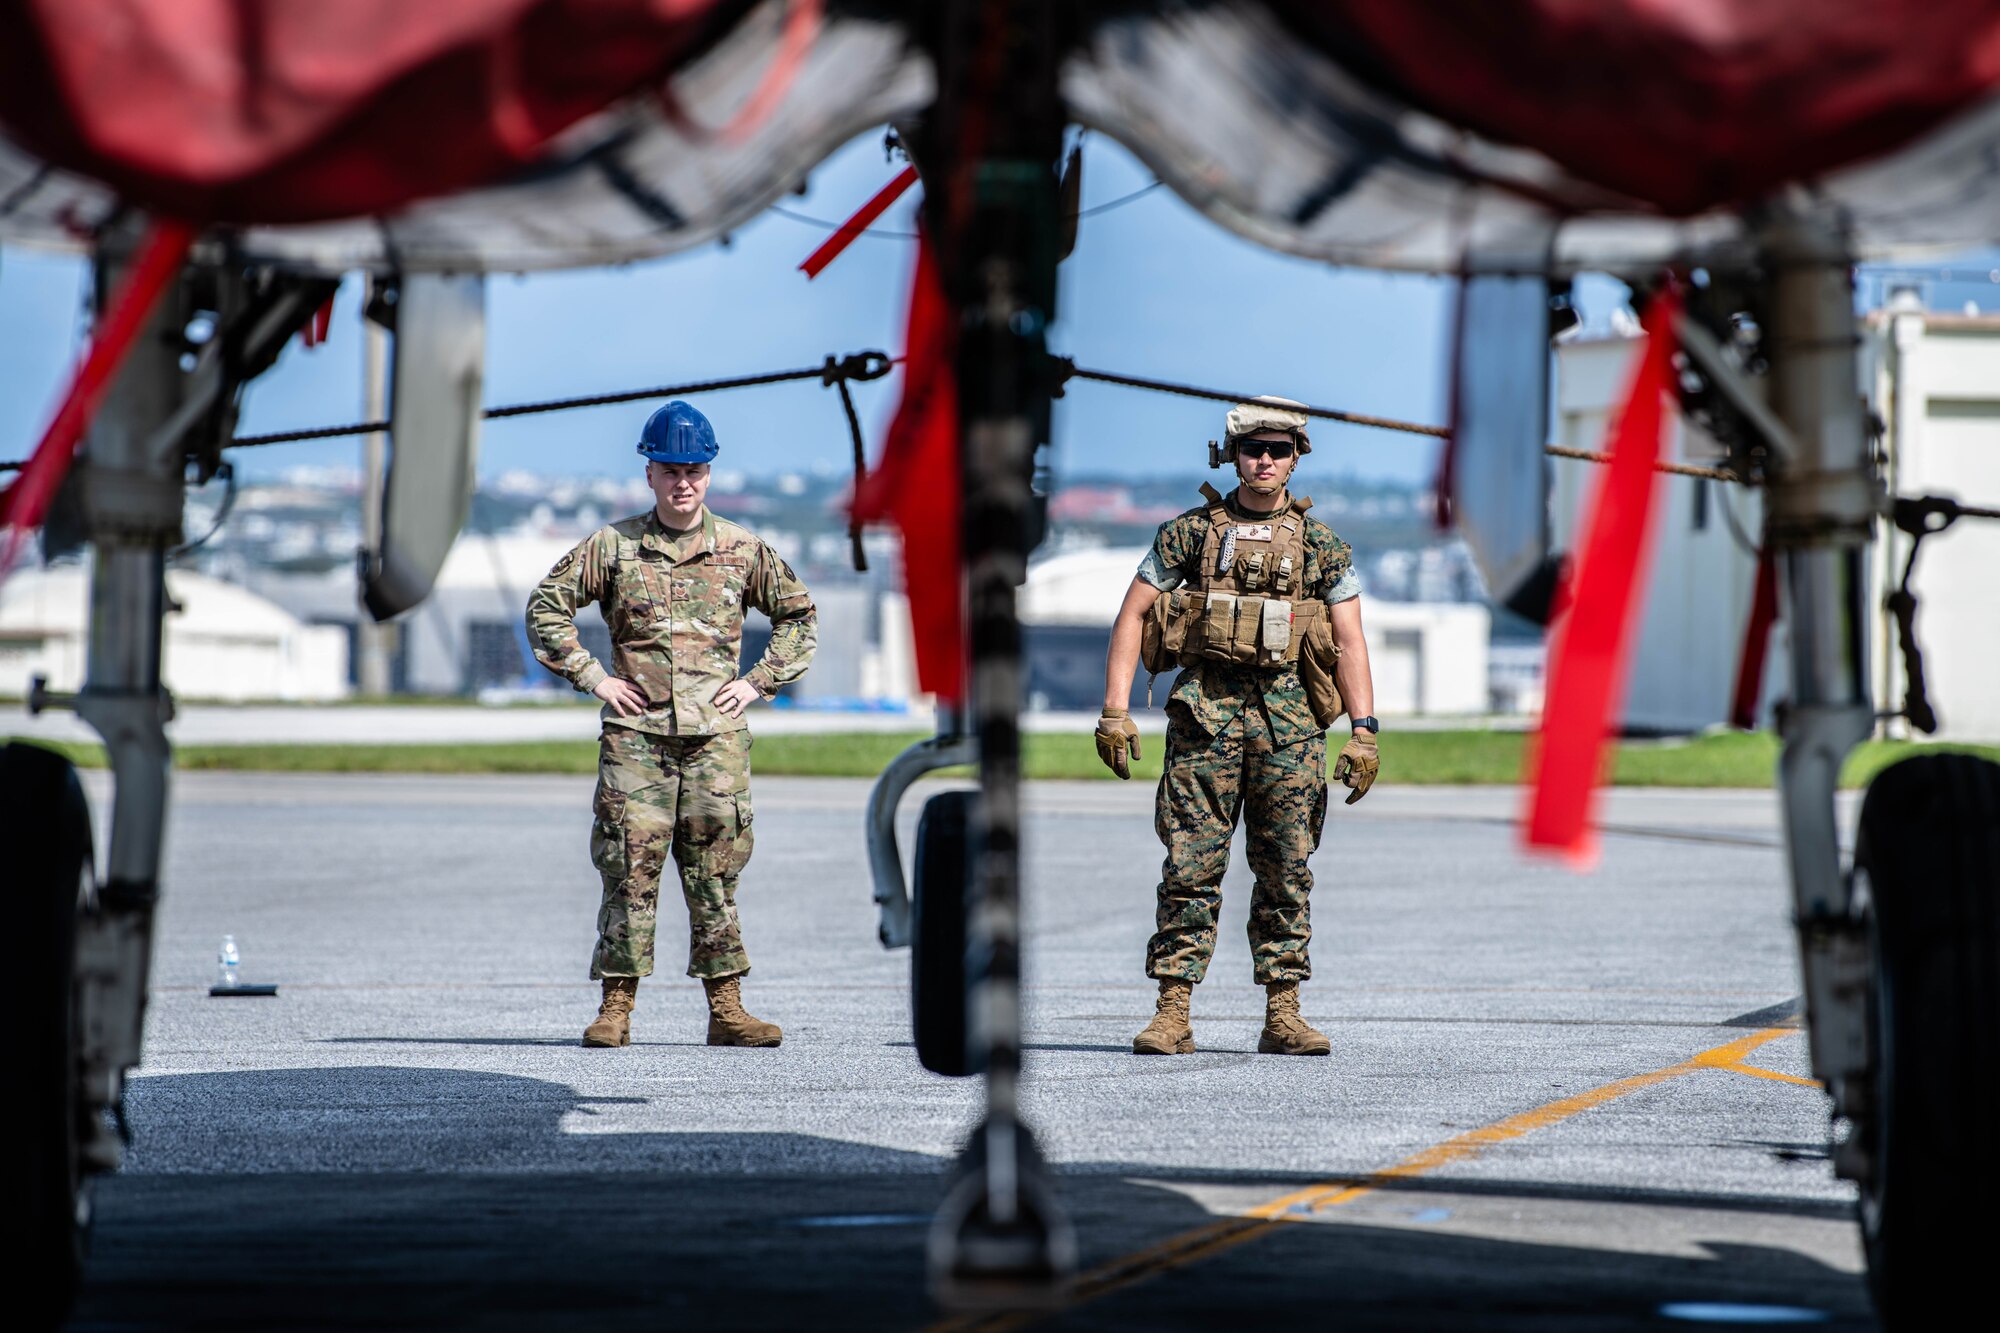 Airman and Marine check for safety.